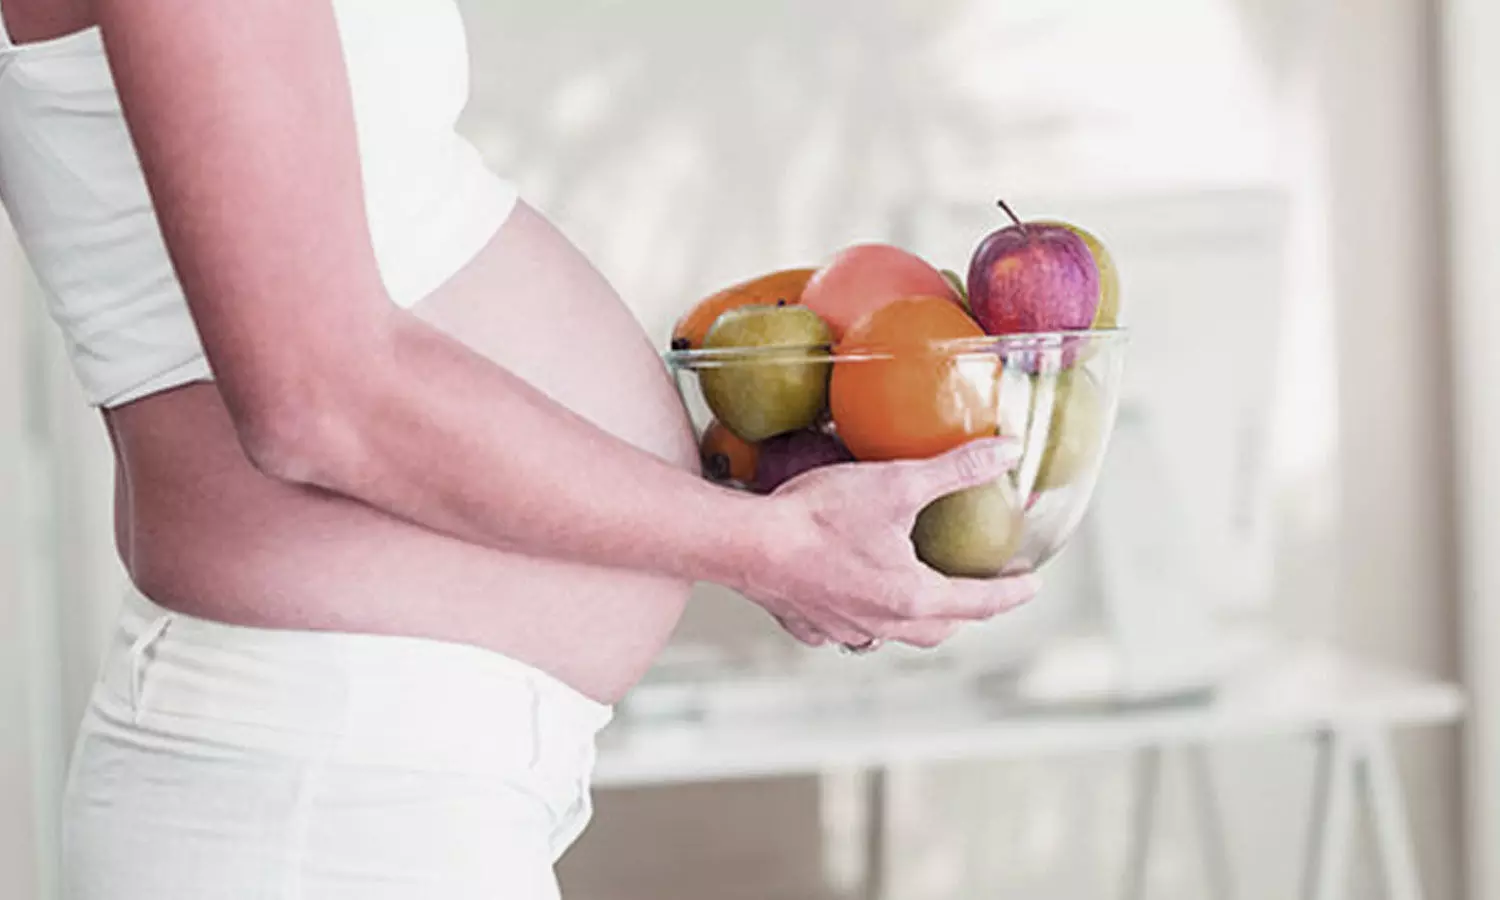 Fruit consumption during pregnancy may improve cognition in offsprings